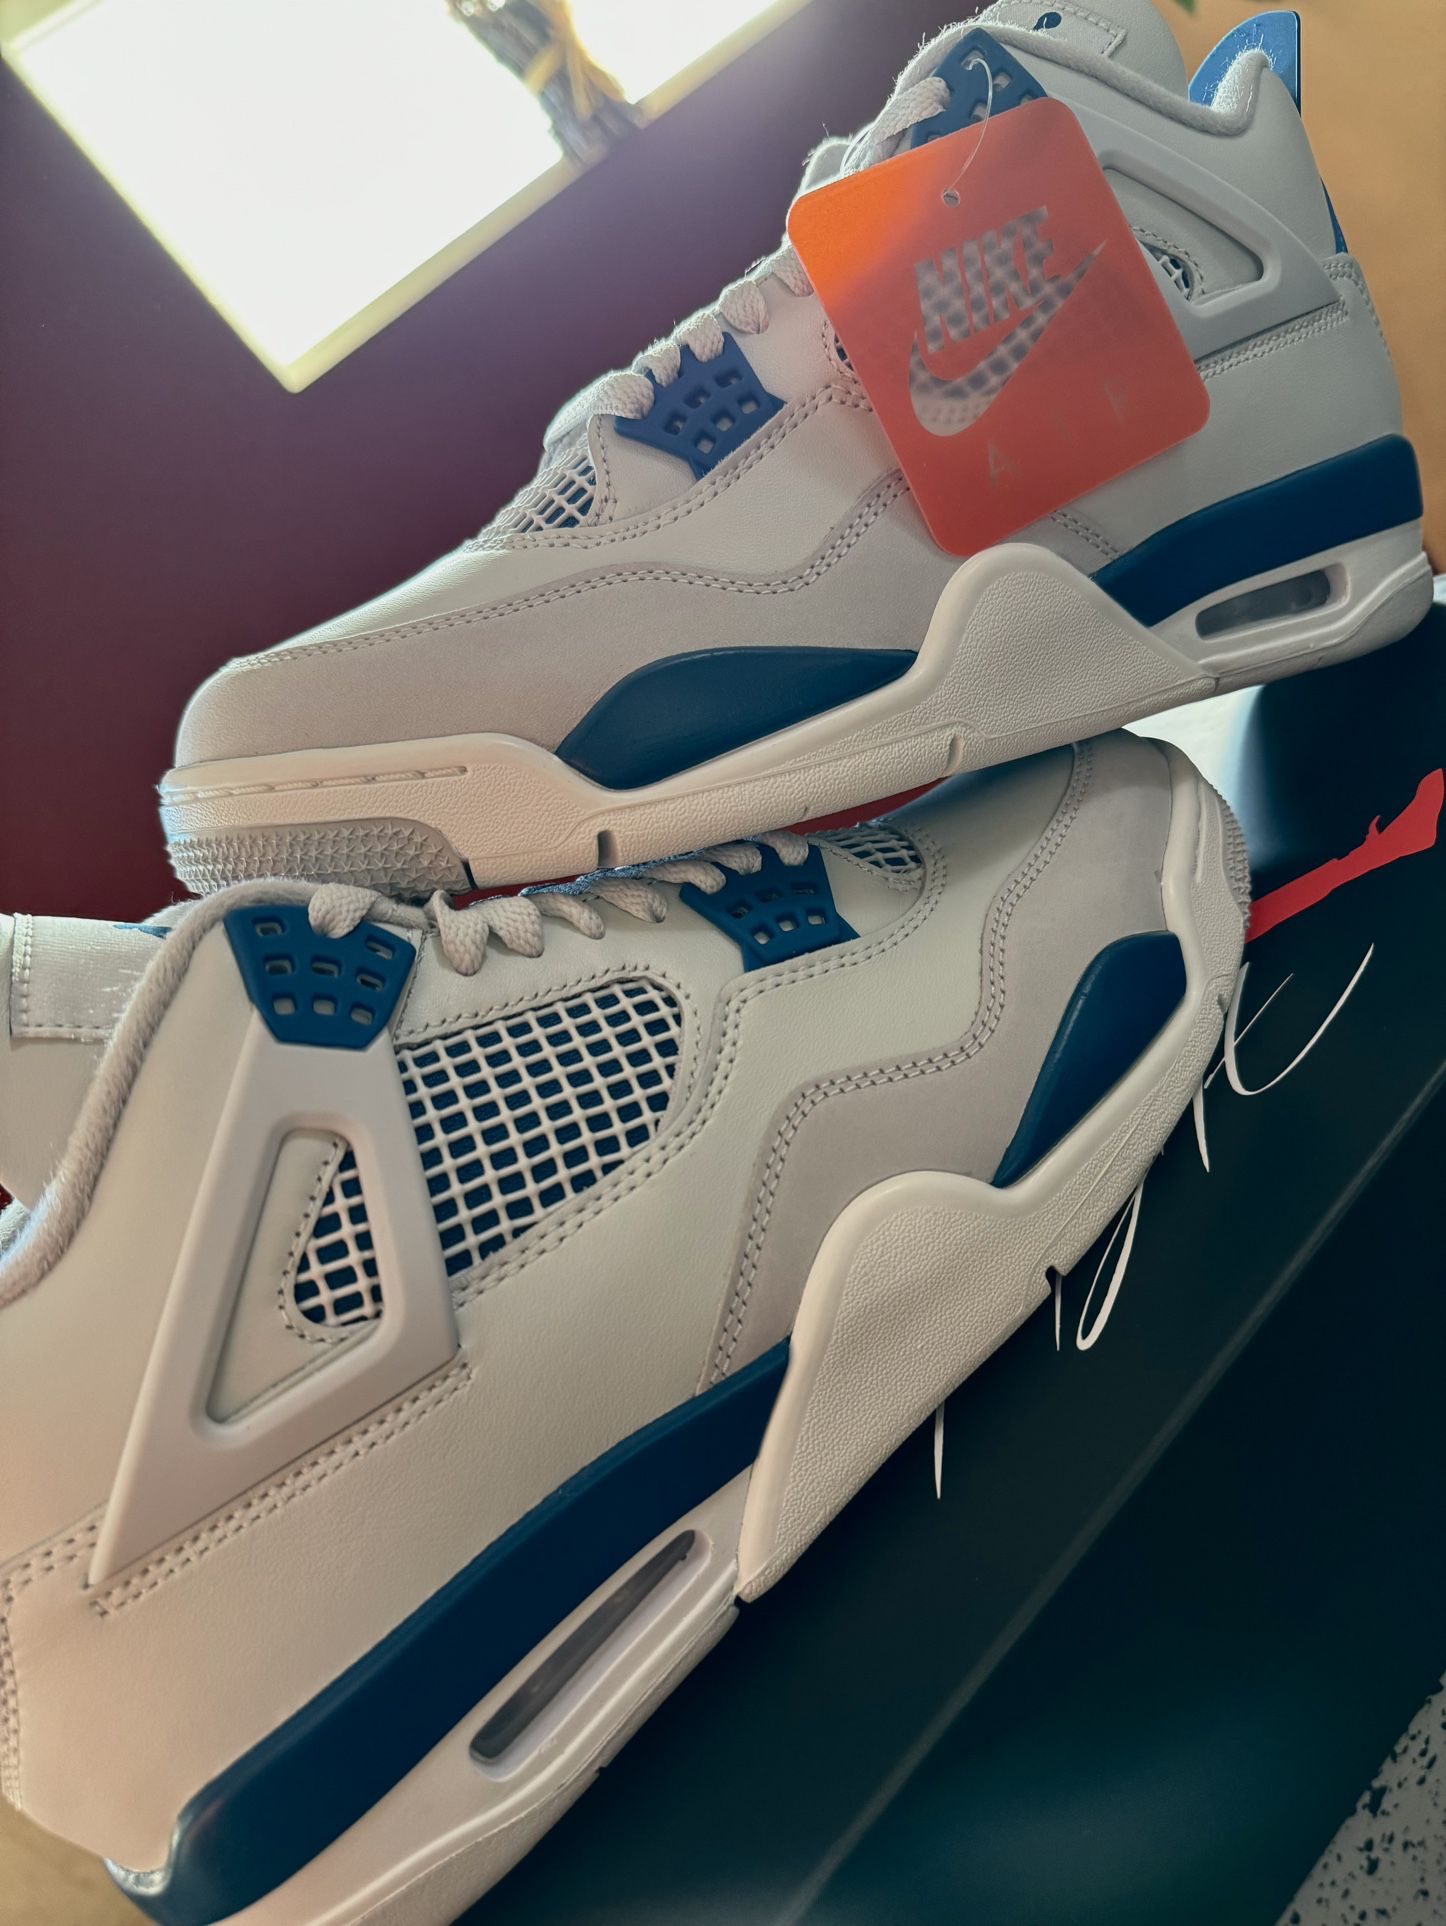 Military Blue 4’s (9.5)